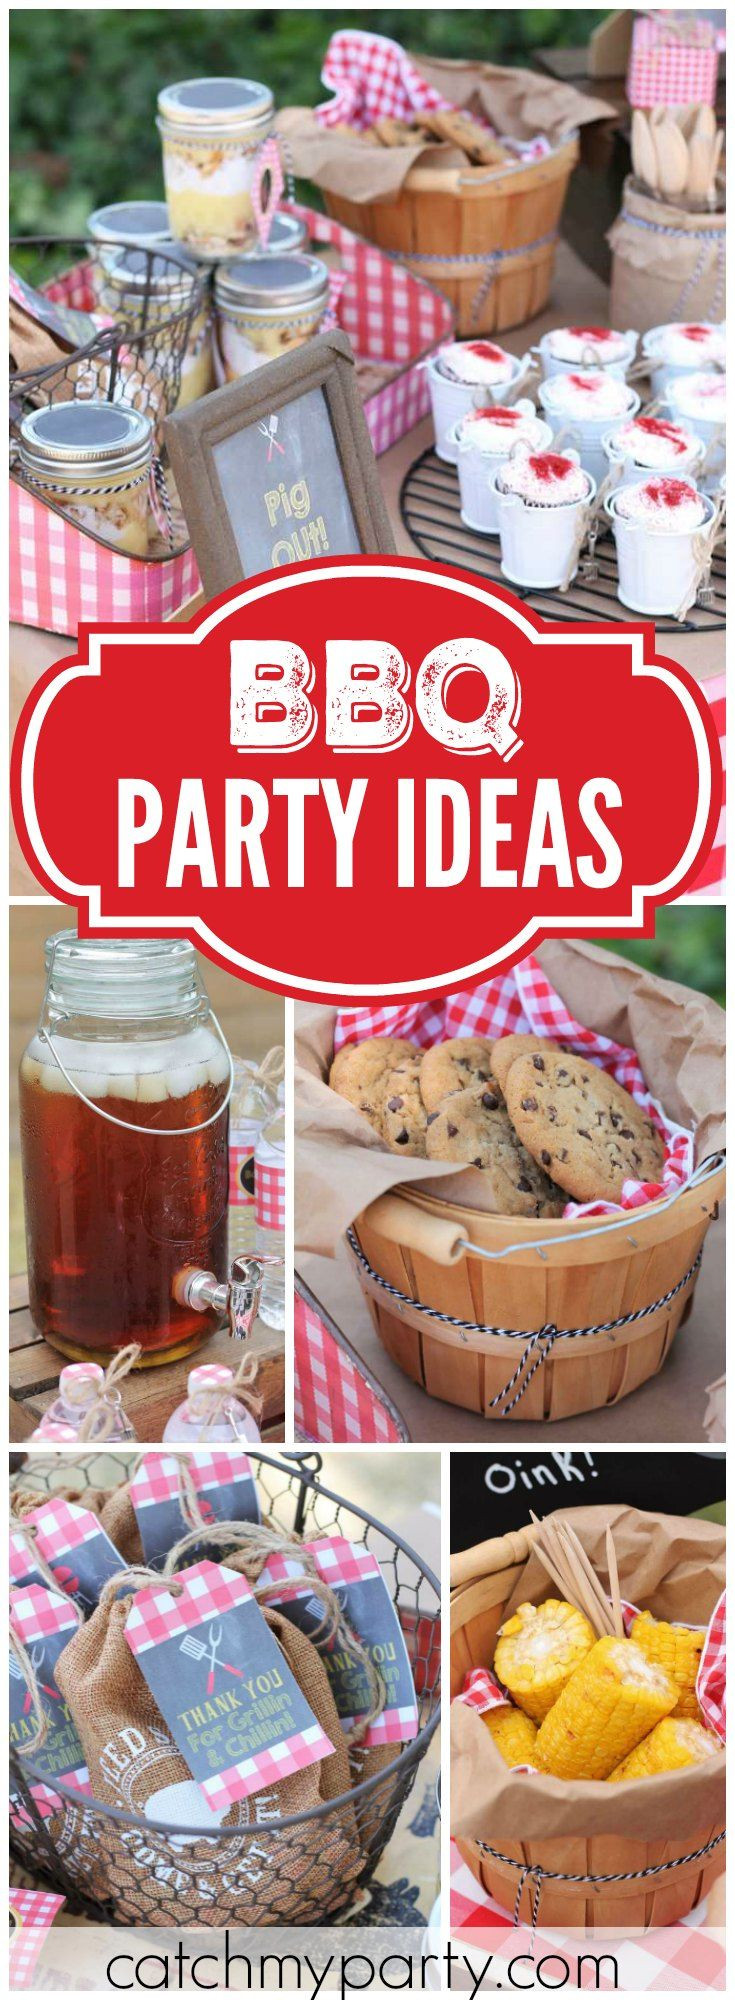 Backyard Bbq Birthday Party Ideas
 How great is this patriotic backyard summer BBQ party See